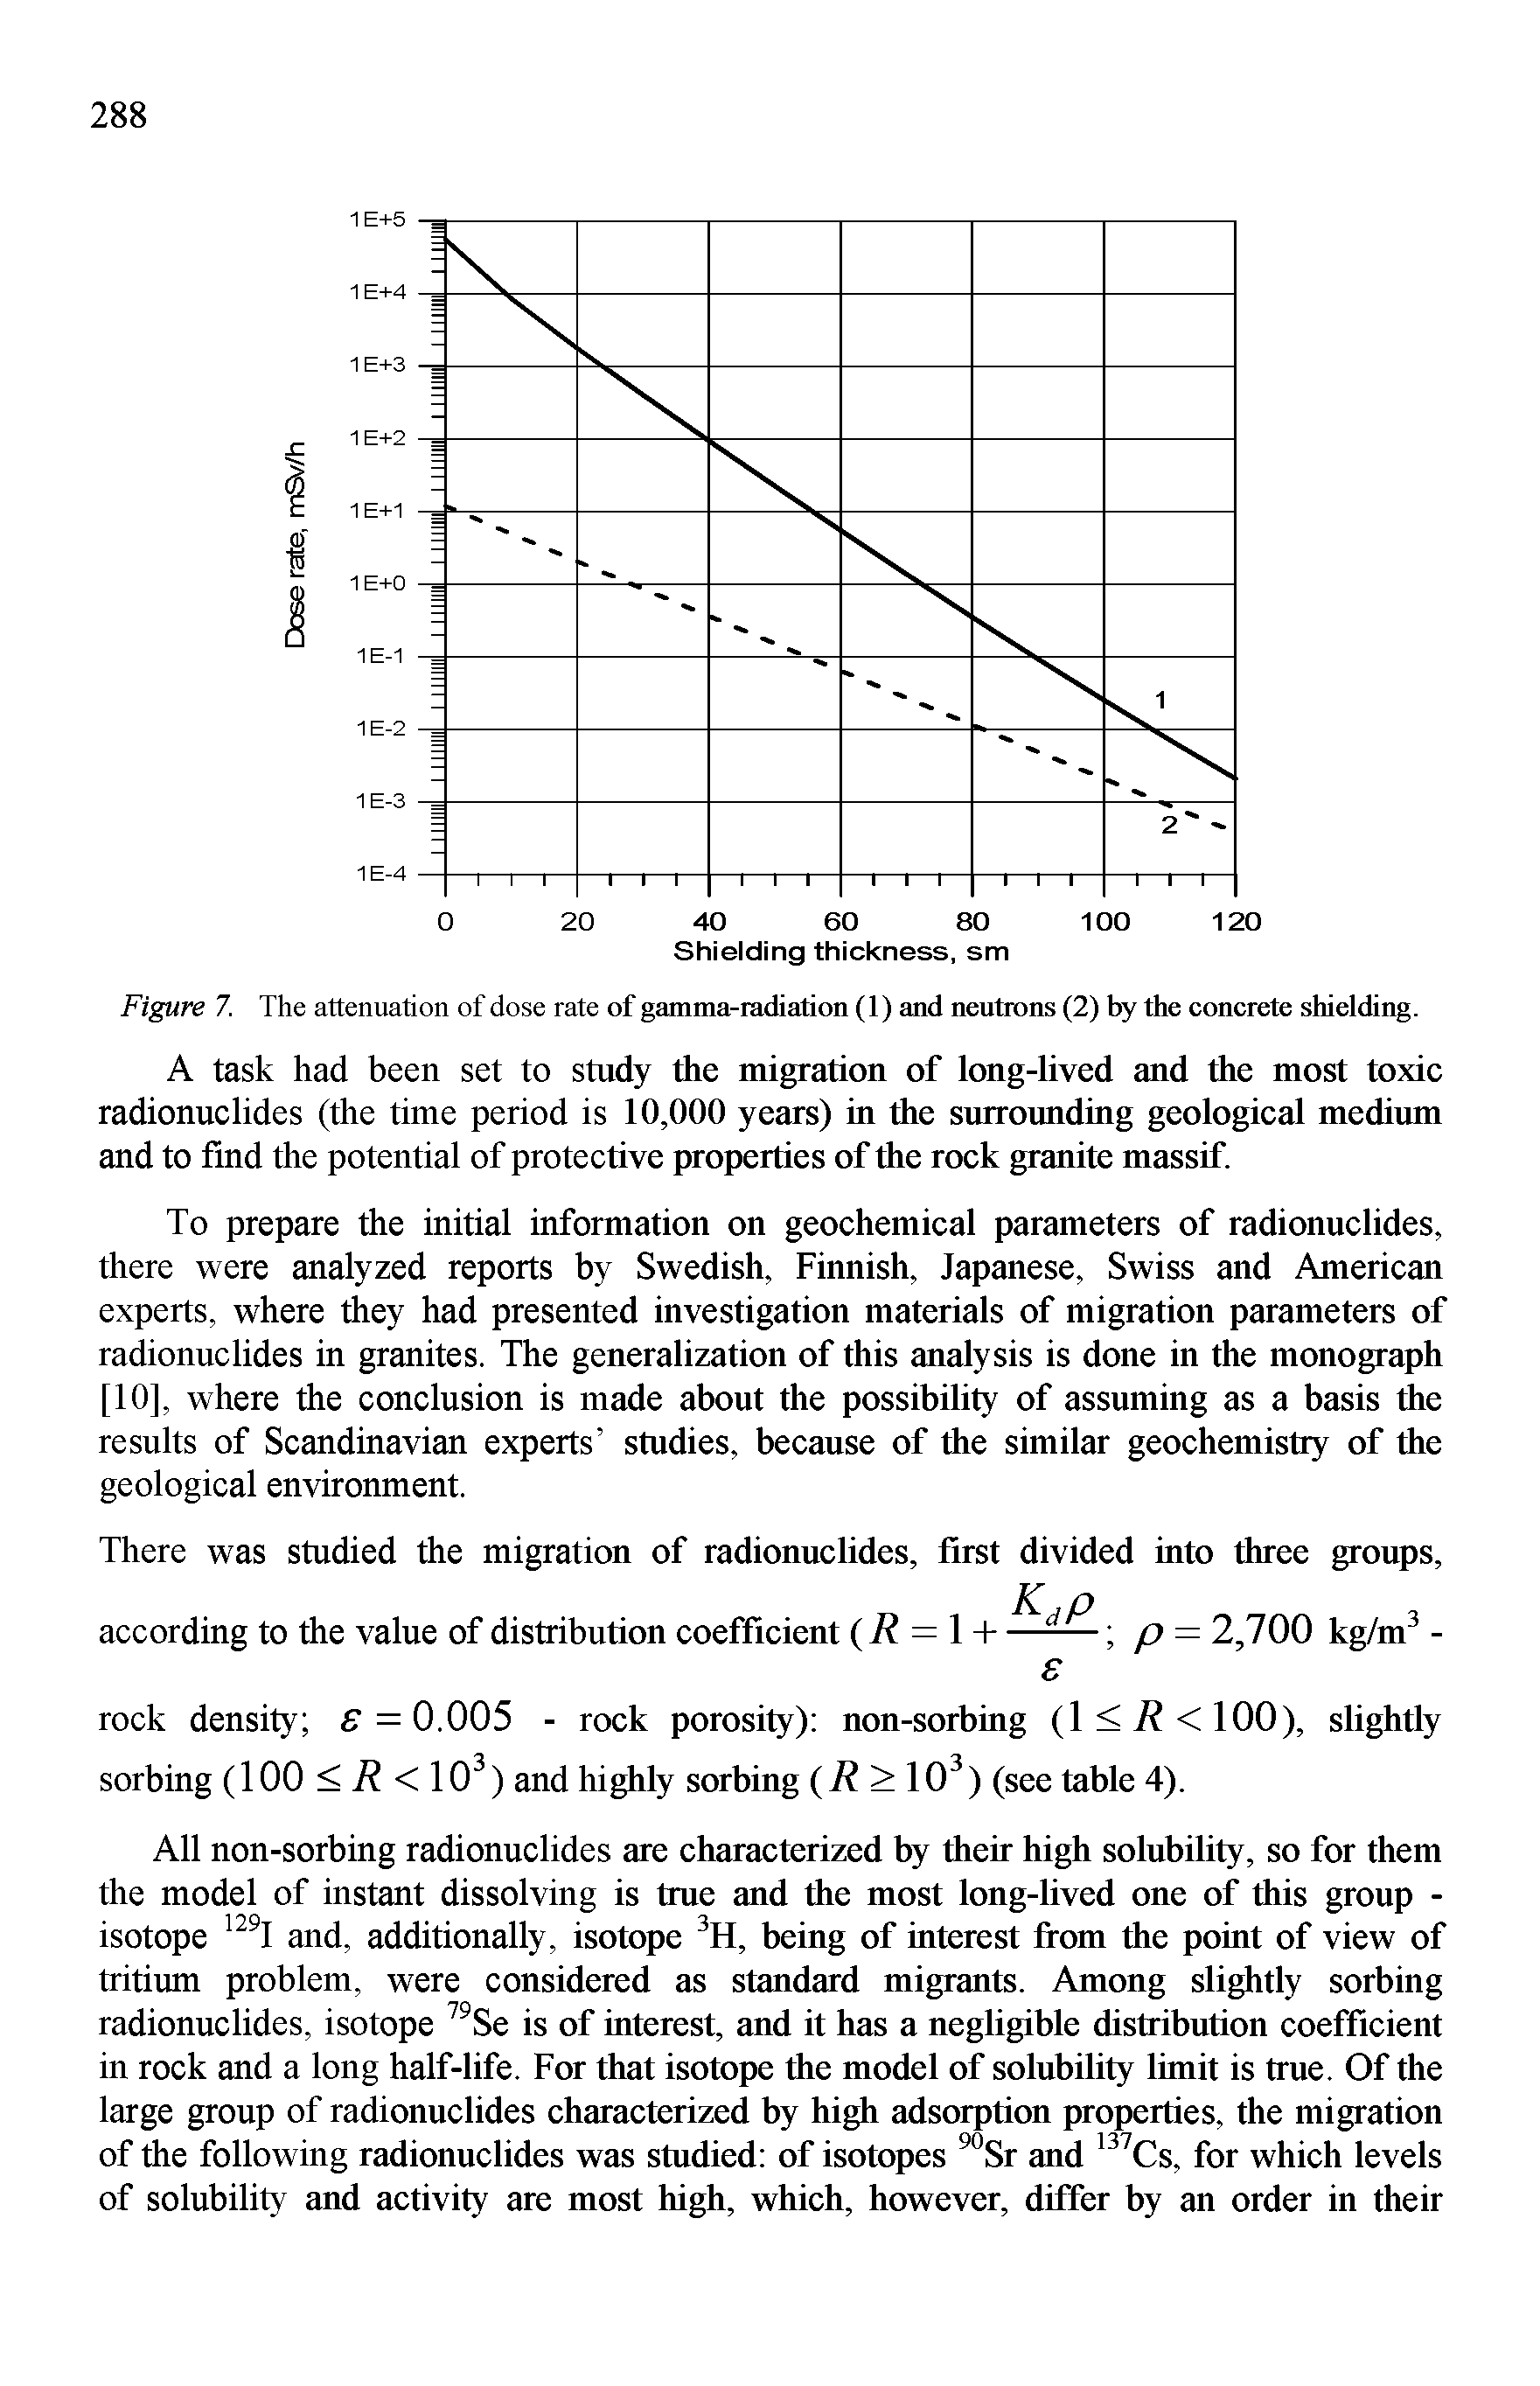 Figure 7. The attenuation of dose rate of gamma-radiation (1) and neutrons (2) by the concrete shielding.